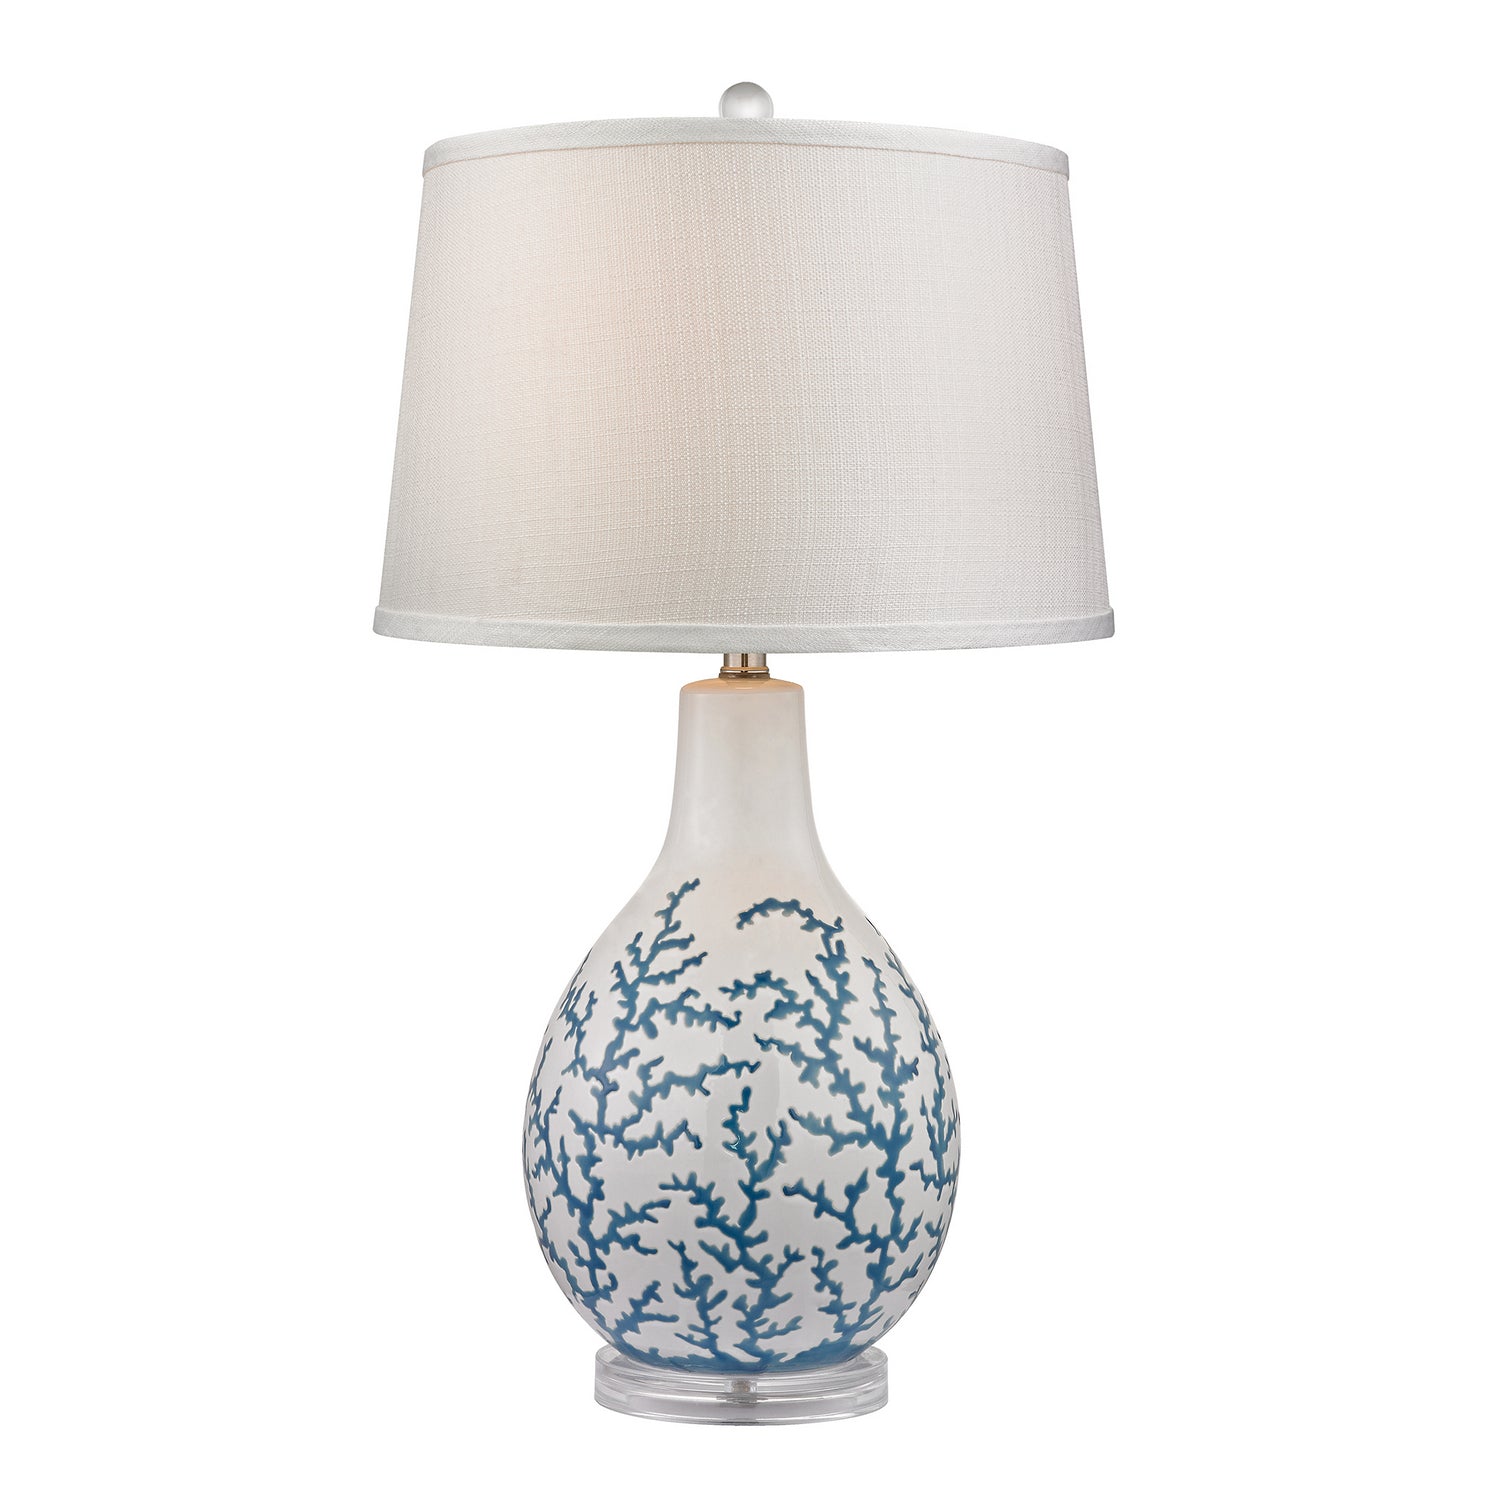 ELK Home - D2478 - One Light Table Lamp - Sixpenny - Blue